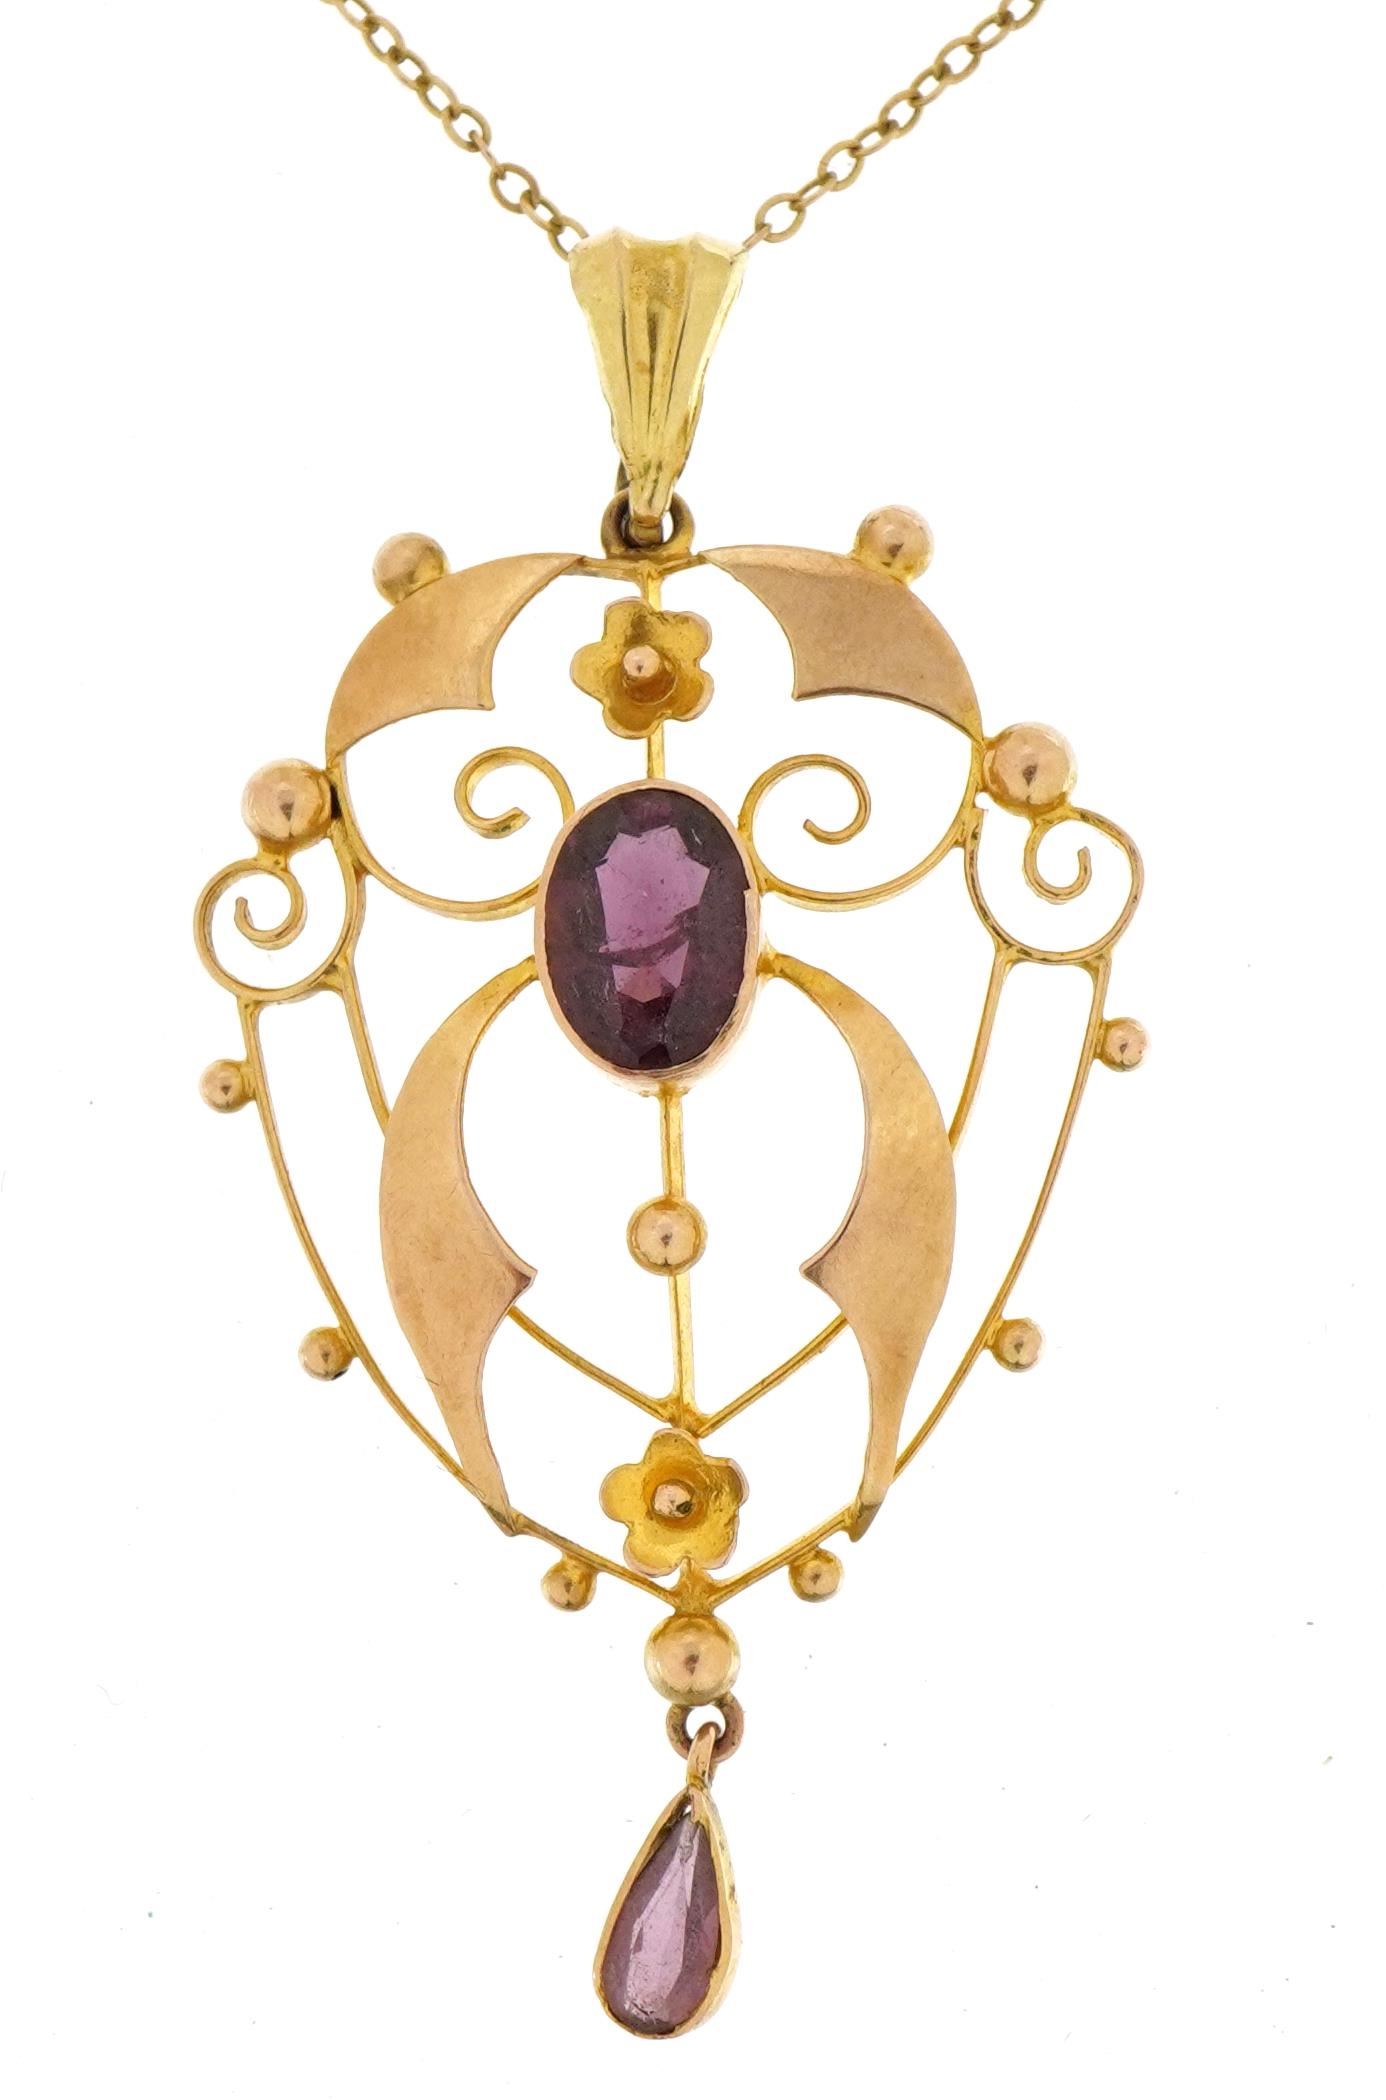 Edwardian 9ct gold openwork pendant set with two amethysts on a 9ct gold Belcher link necklace, 5.